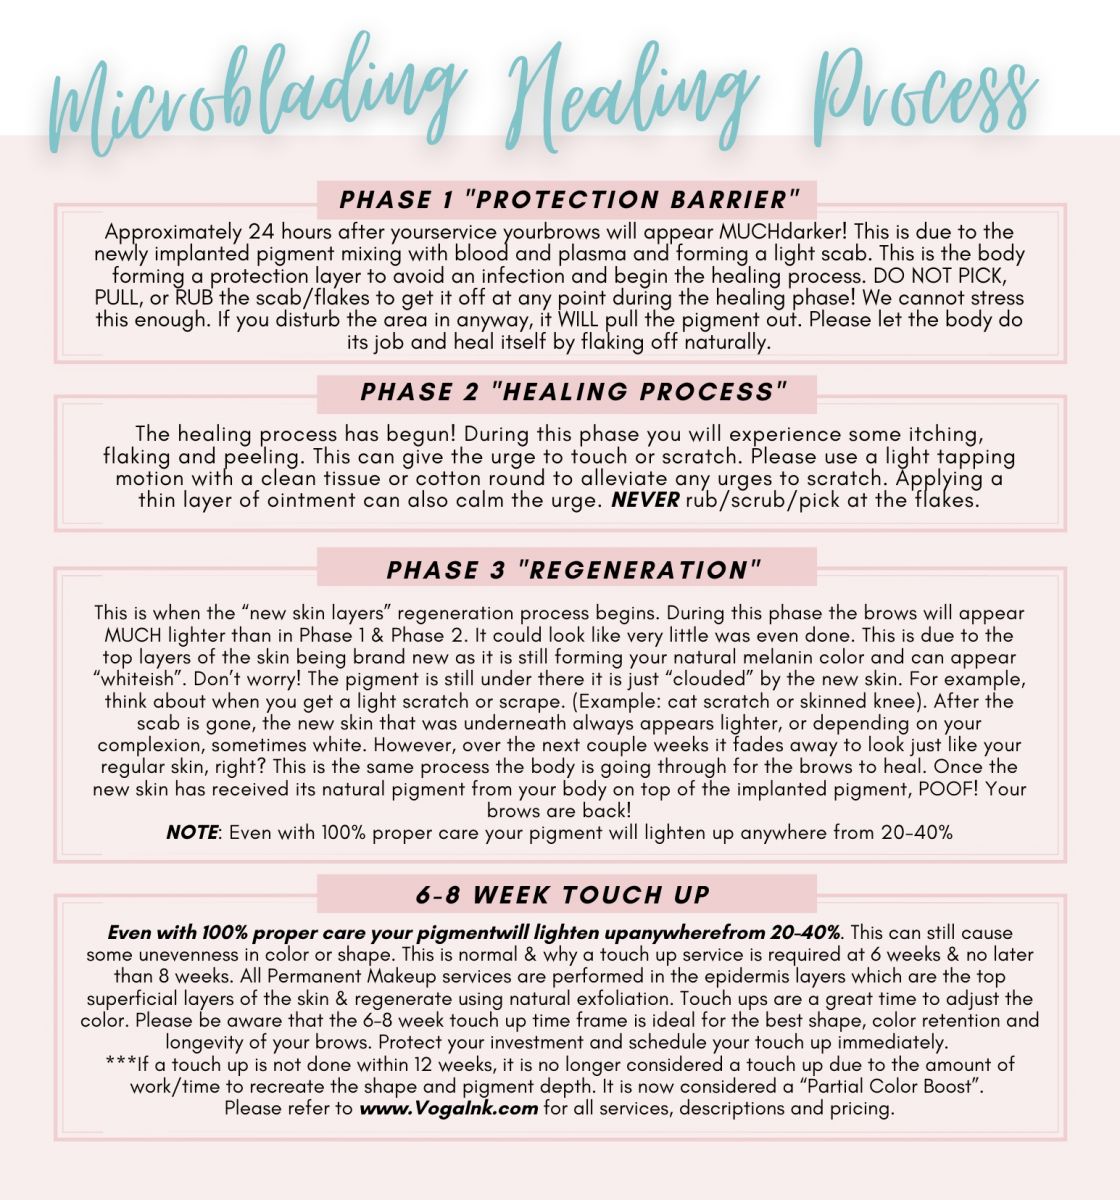 Microblading aftercare instructions how to take care of your brows at home through the stages of microblading healing process. Brow microblading Day by Day healing process guide.